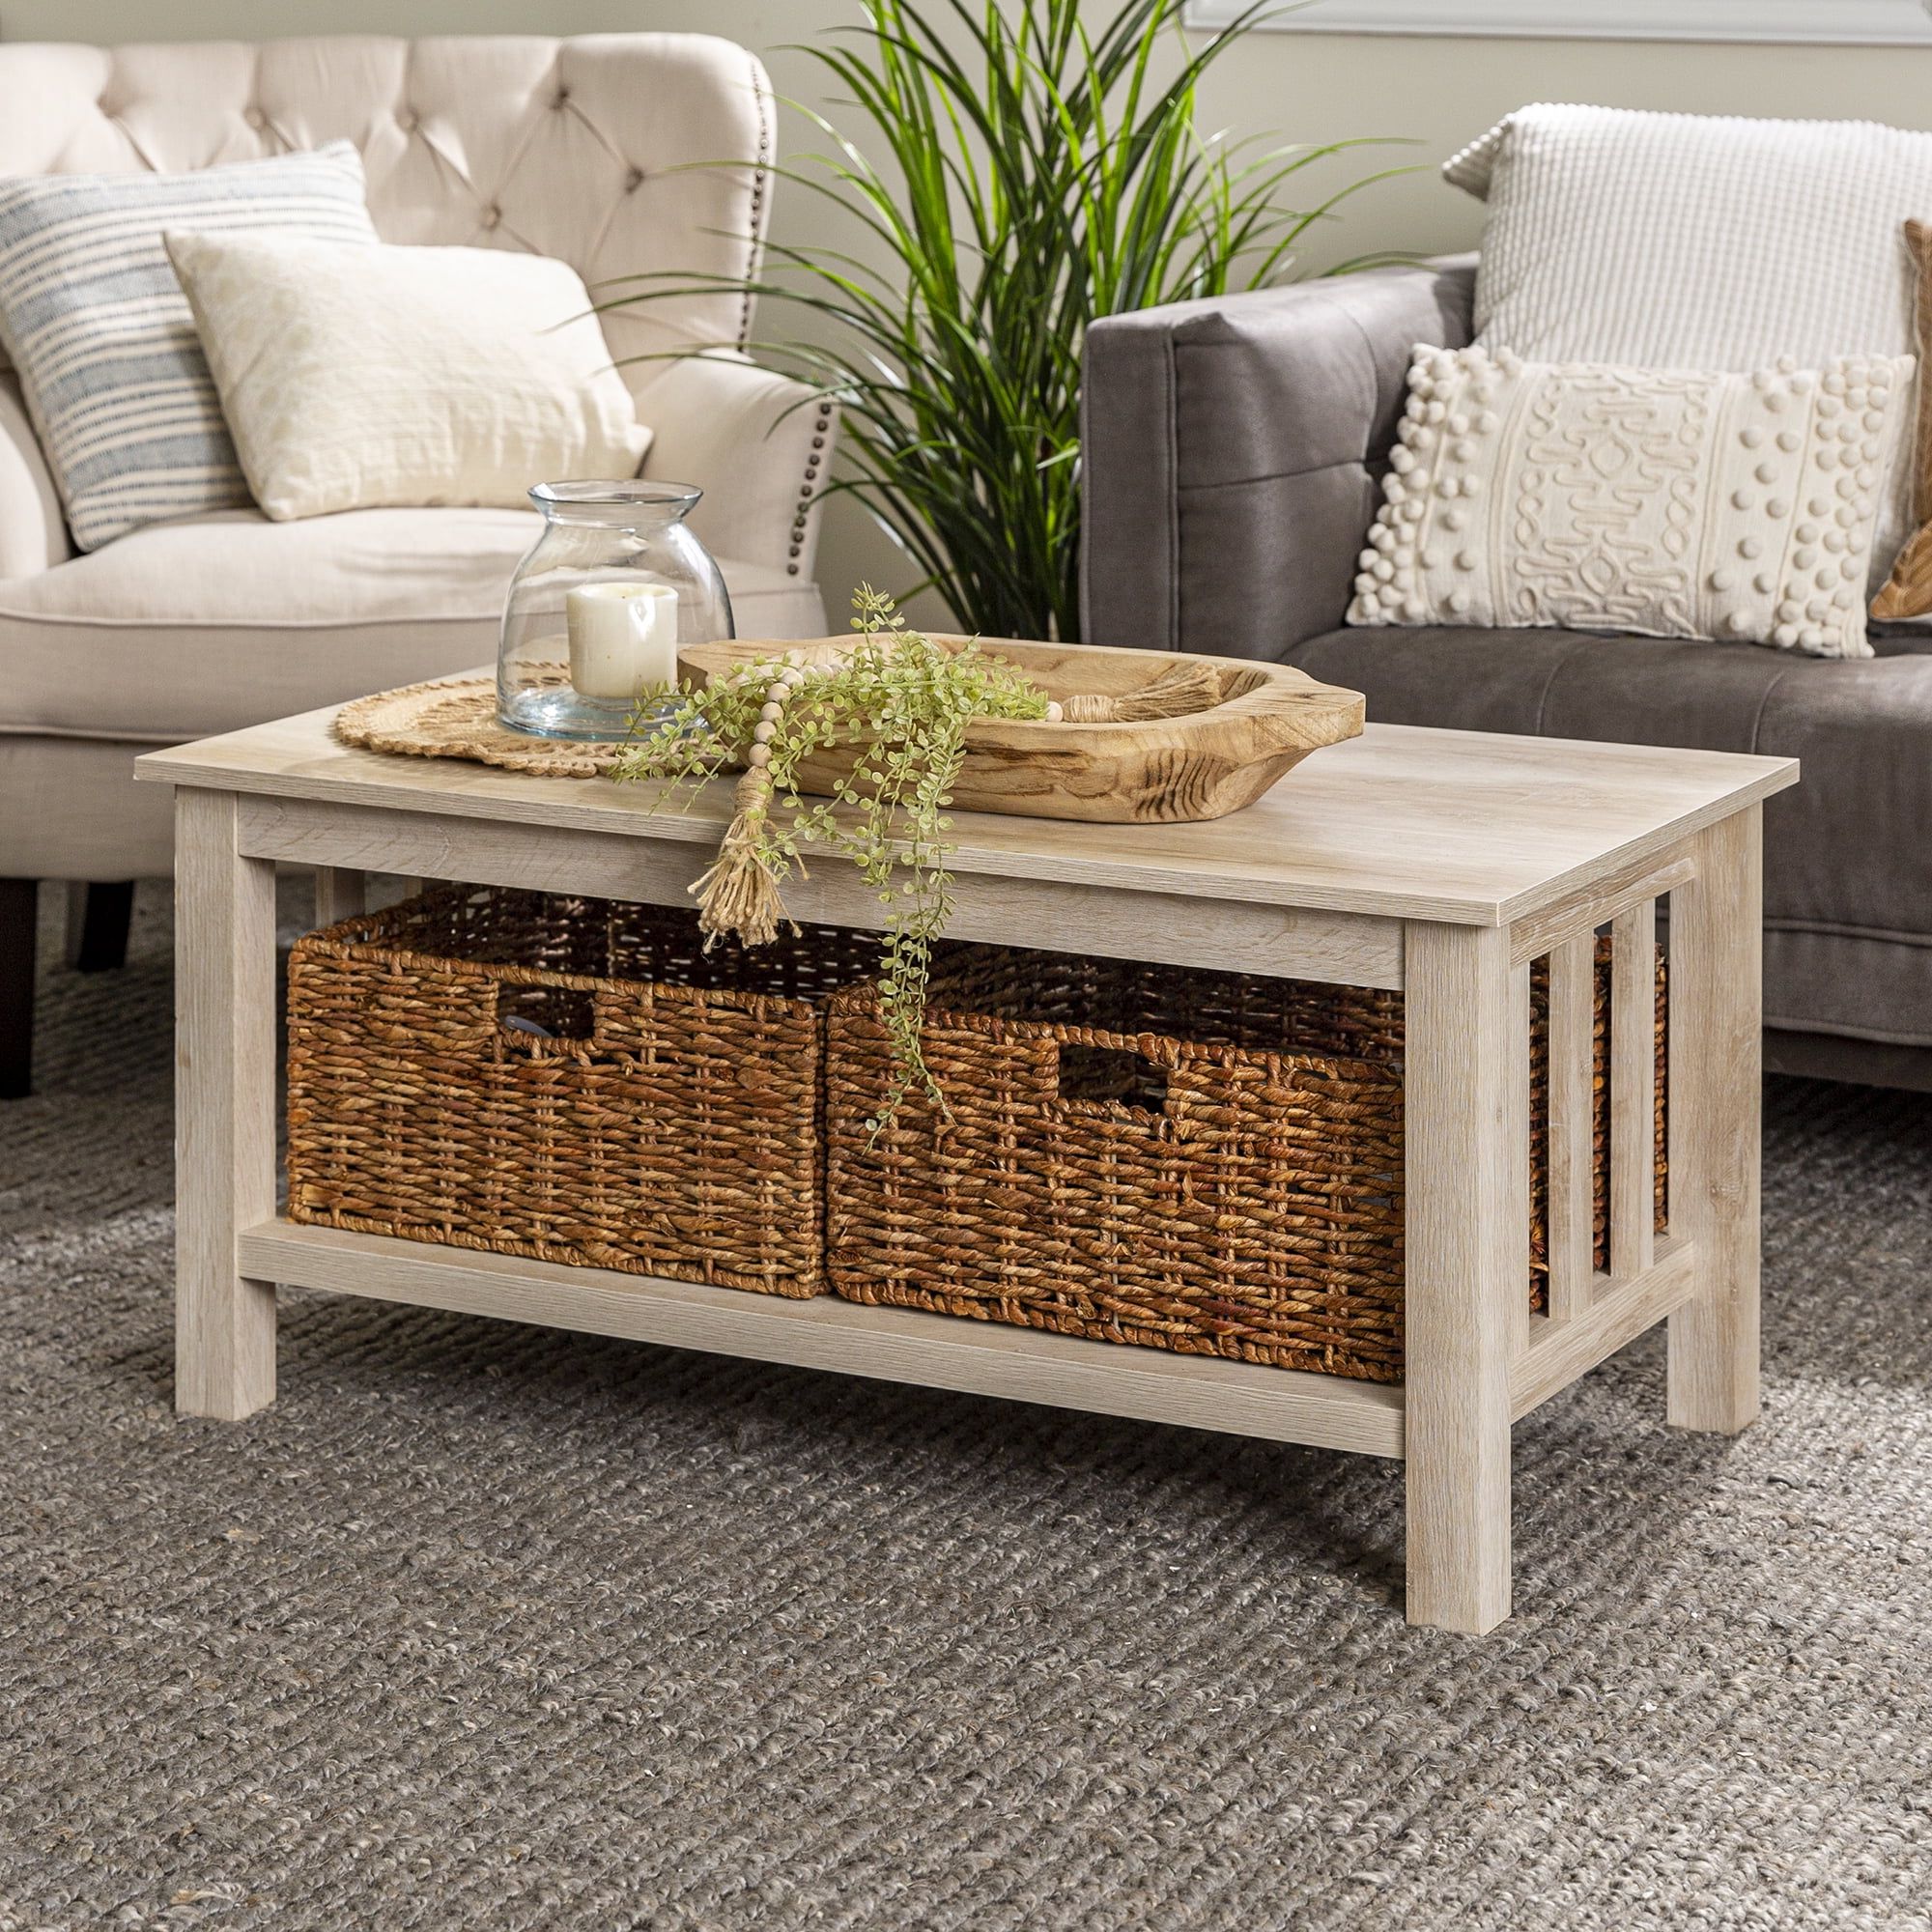 Most Recent Coffee Tables With Storage With Regard To Woven Paths Traditional Storage Coffee Table With Bins, White Oak (Photo 6 of 15)